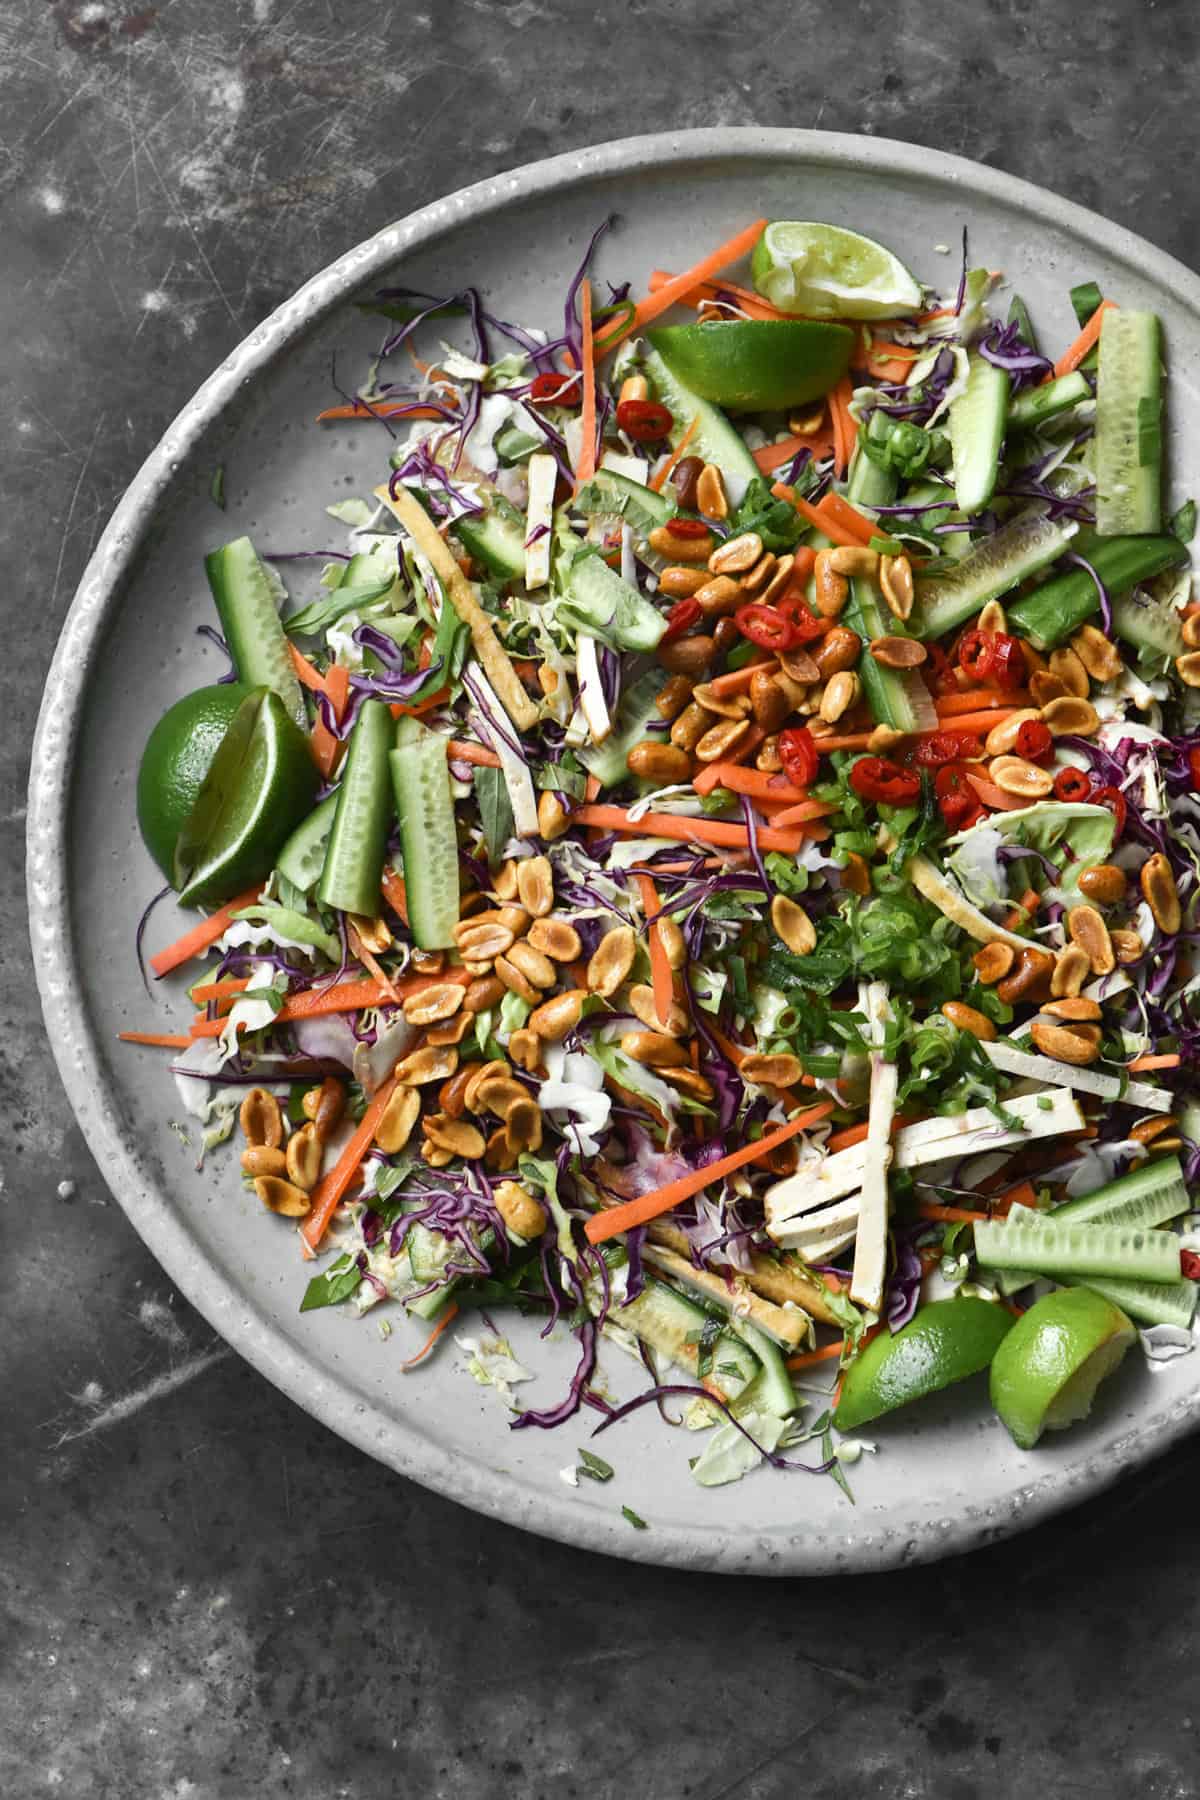 An aerial view of a big ceramic plate of colourful Vegan Vietnamese coleslaw. The coleslaw is topped with lots of lime wedges, toasted peanuts and spring onion greens. The coleslaw is set against a mottled blue steel backdrop